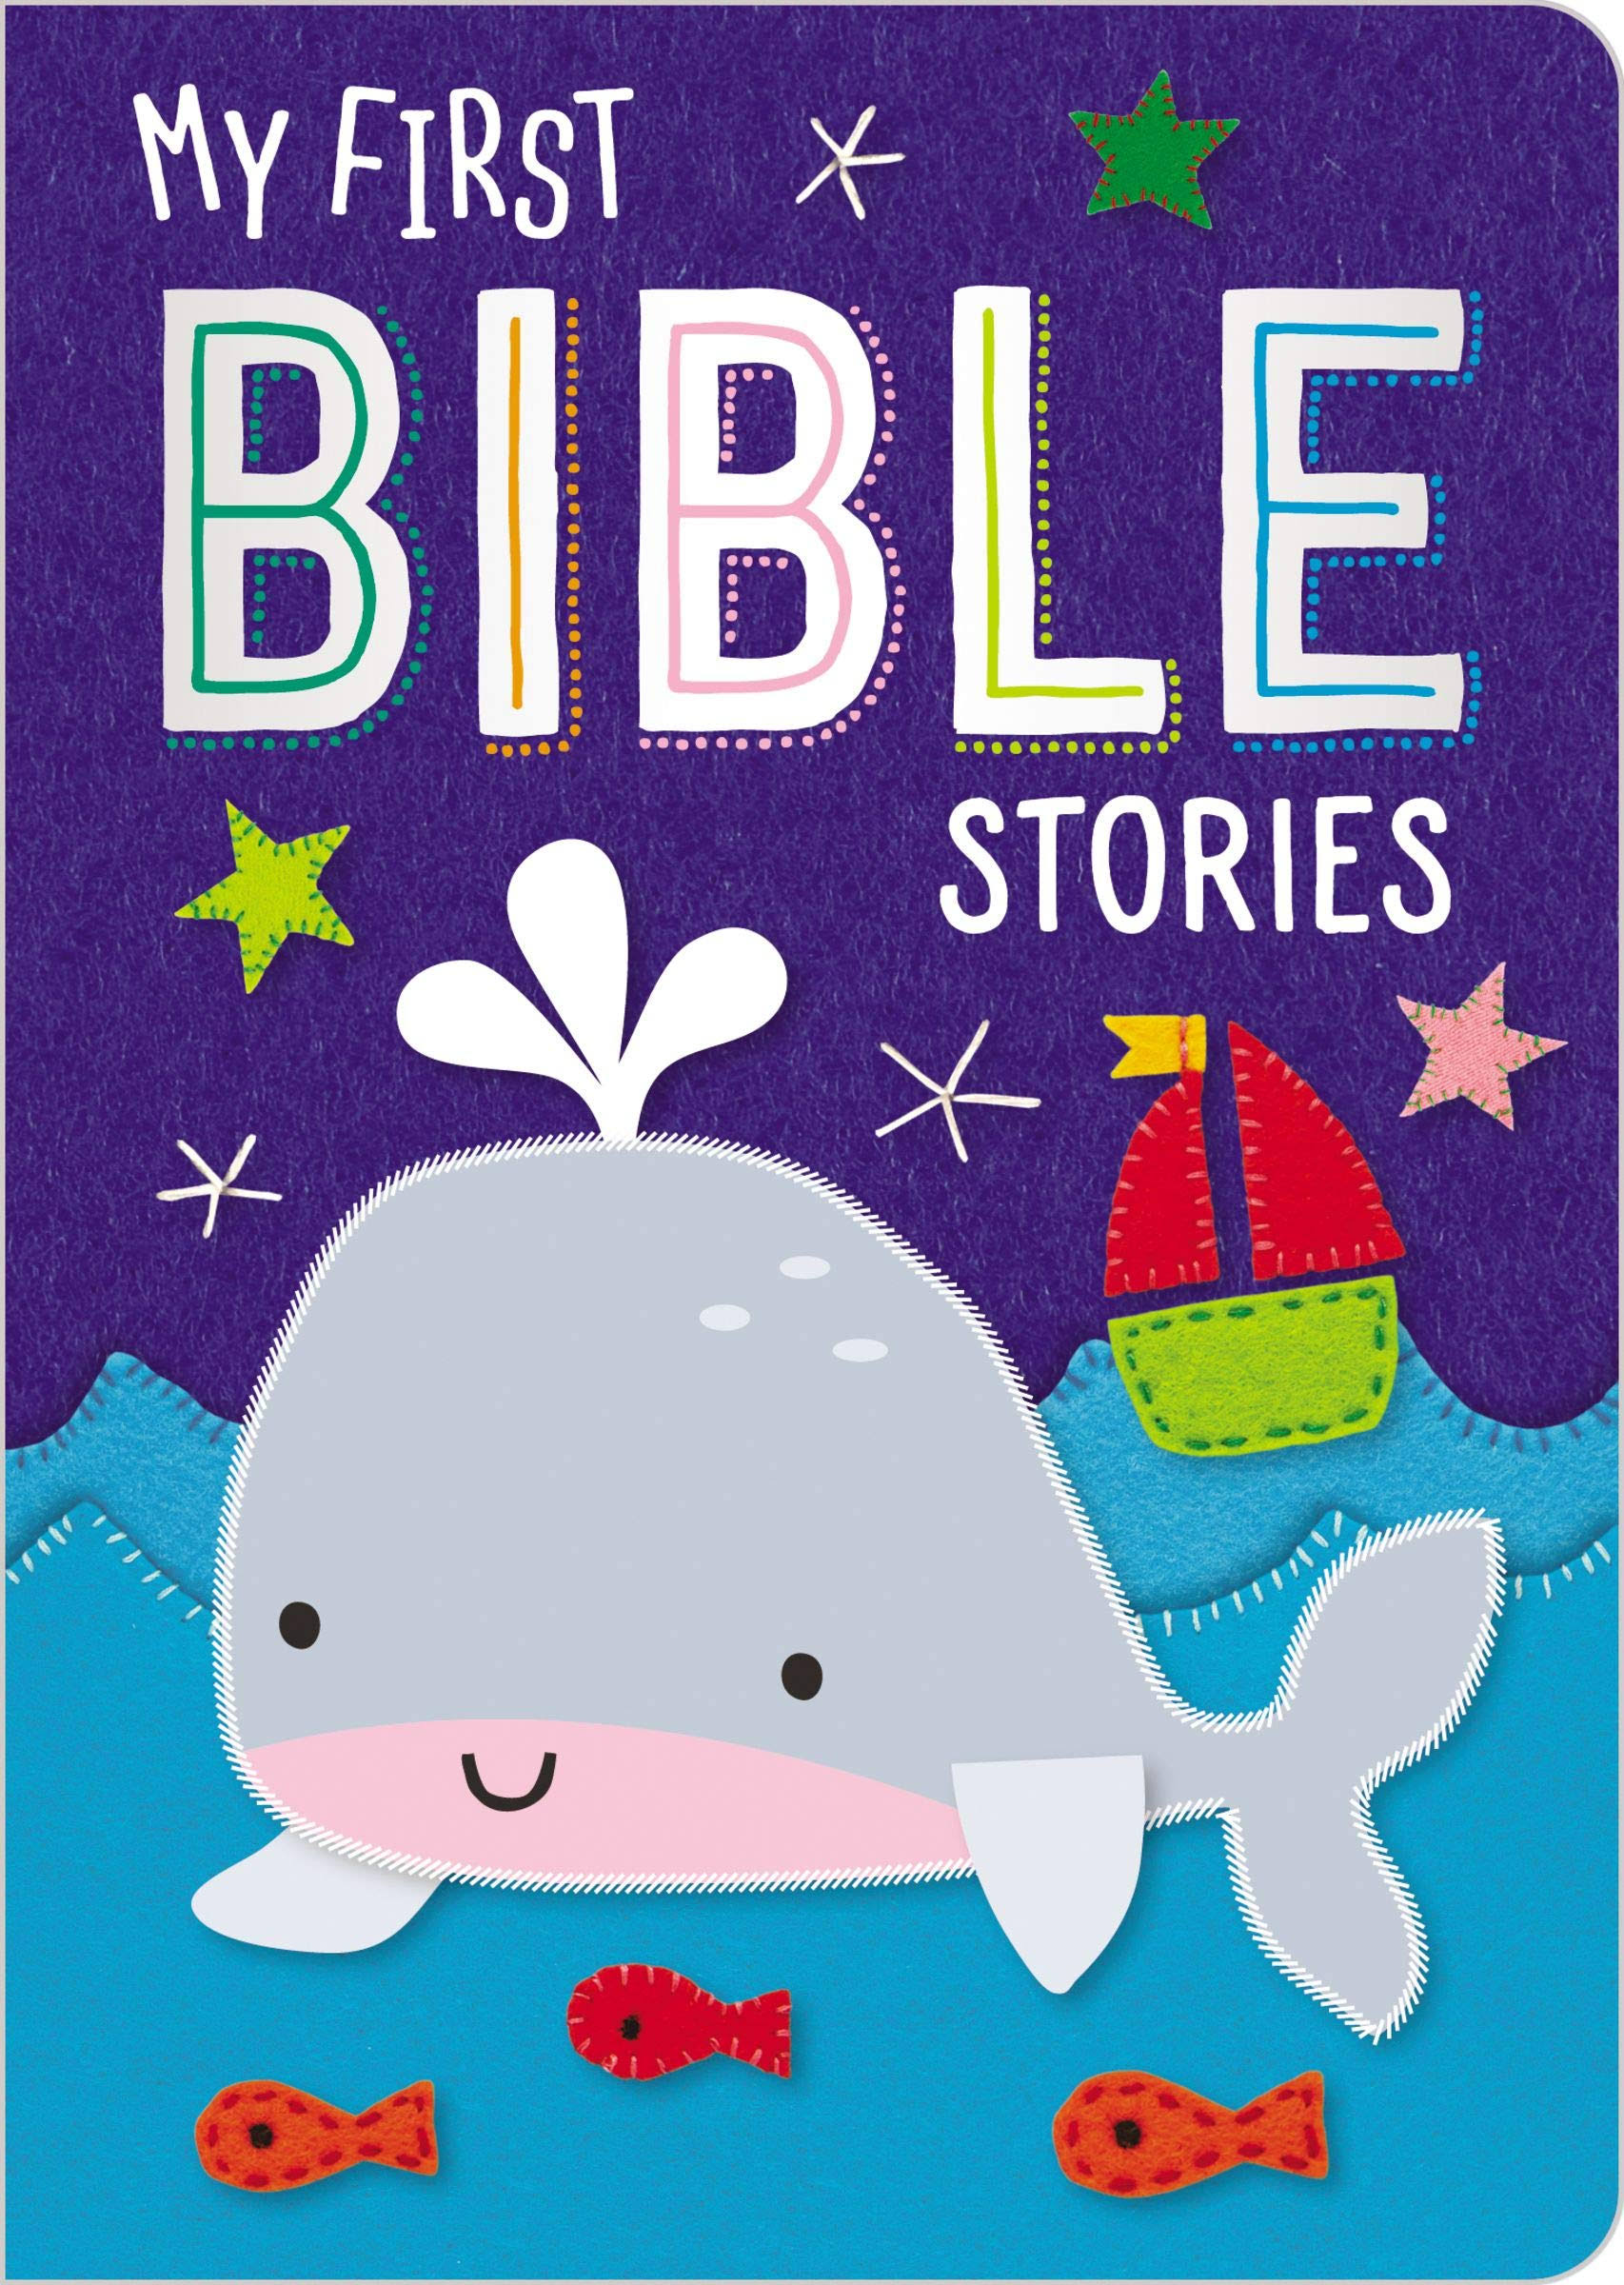 My First Bible Stories [Book]